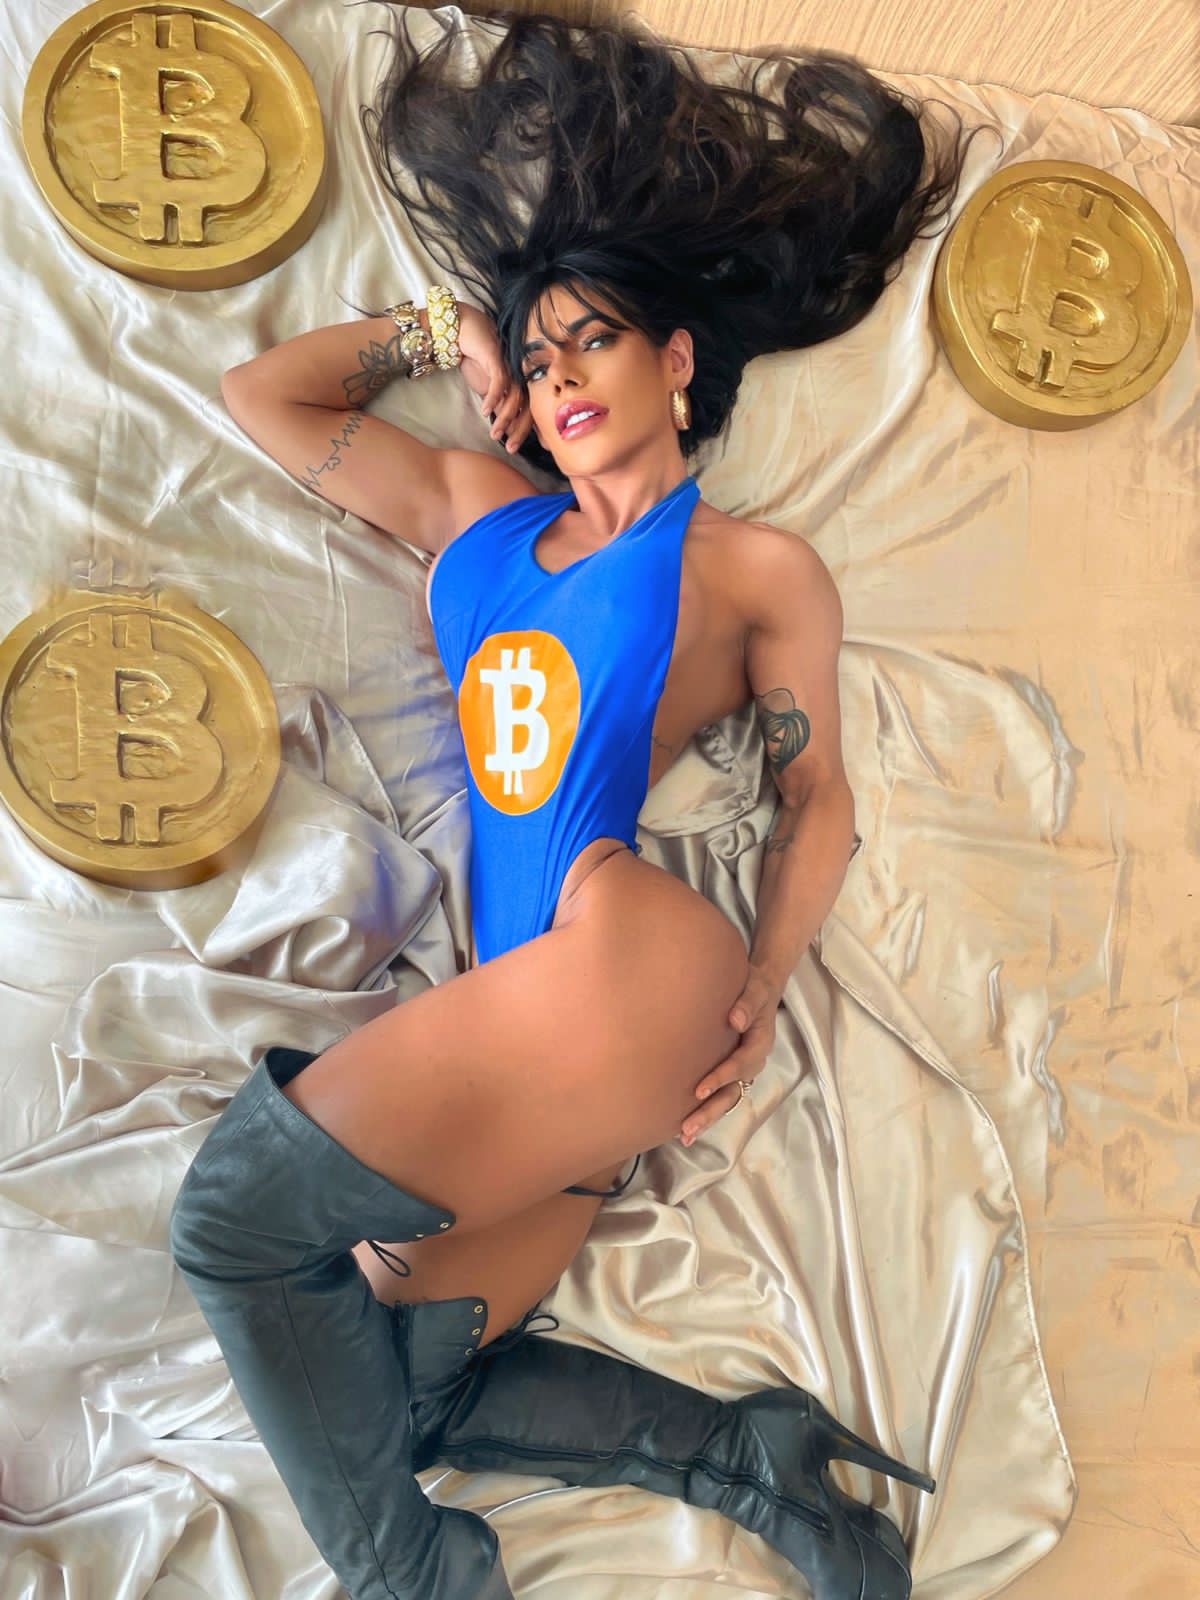 Photos n°1 : Today Miss BumBum Suzy Cortez is Also Known as Crypto Queen!